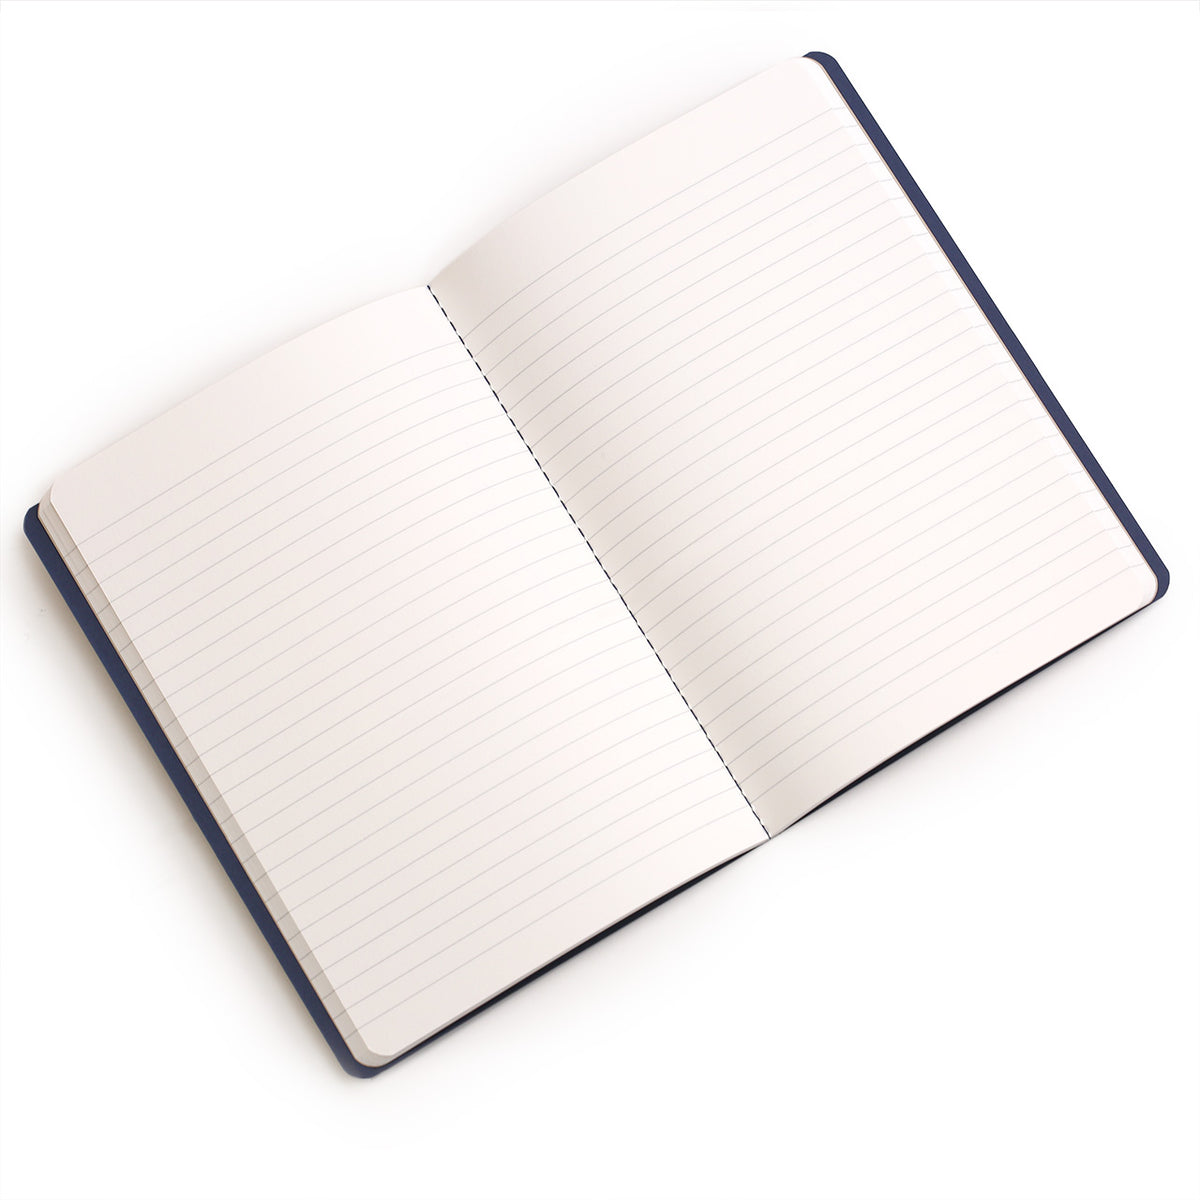 centre spread of the lined notebook shows the coloured stitching and lay-flat capacity